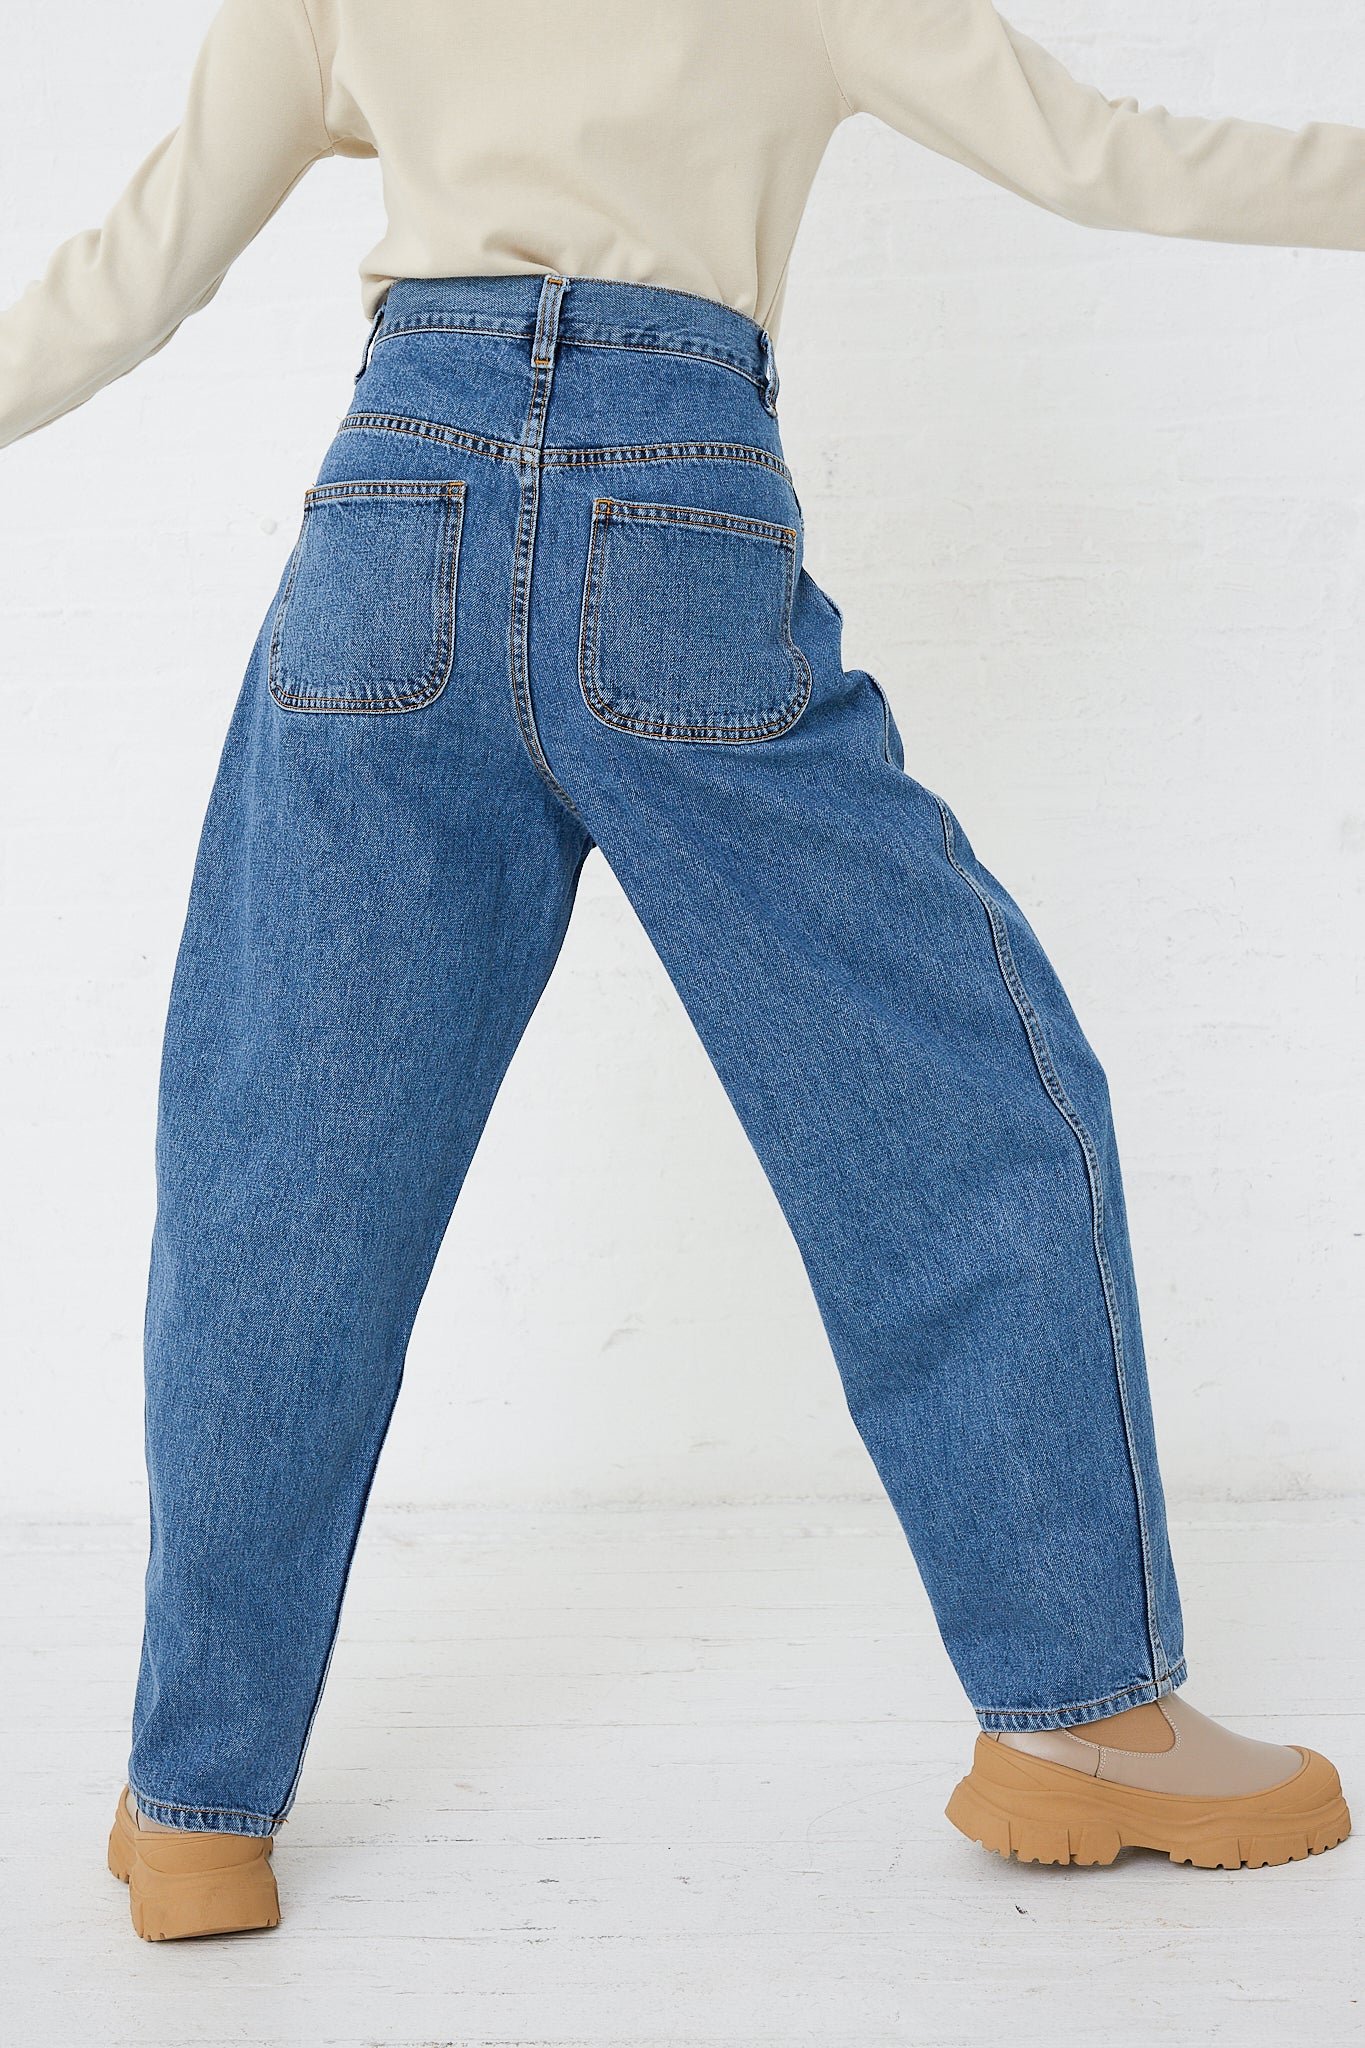 A woman wearing a pair of high waisted Jesse Kamm Japanese Denim California Wide jeans in Cowboy Blue and a tee shirt.